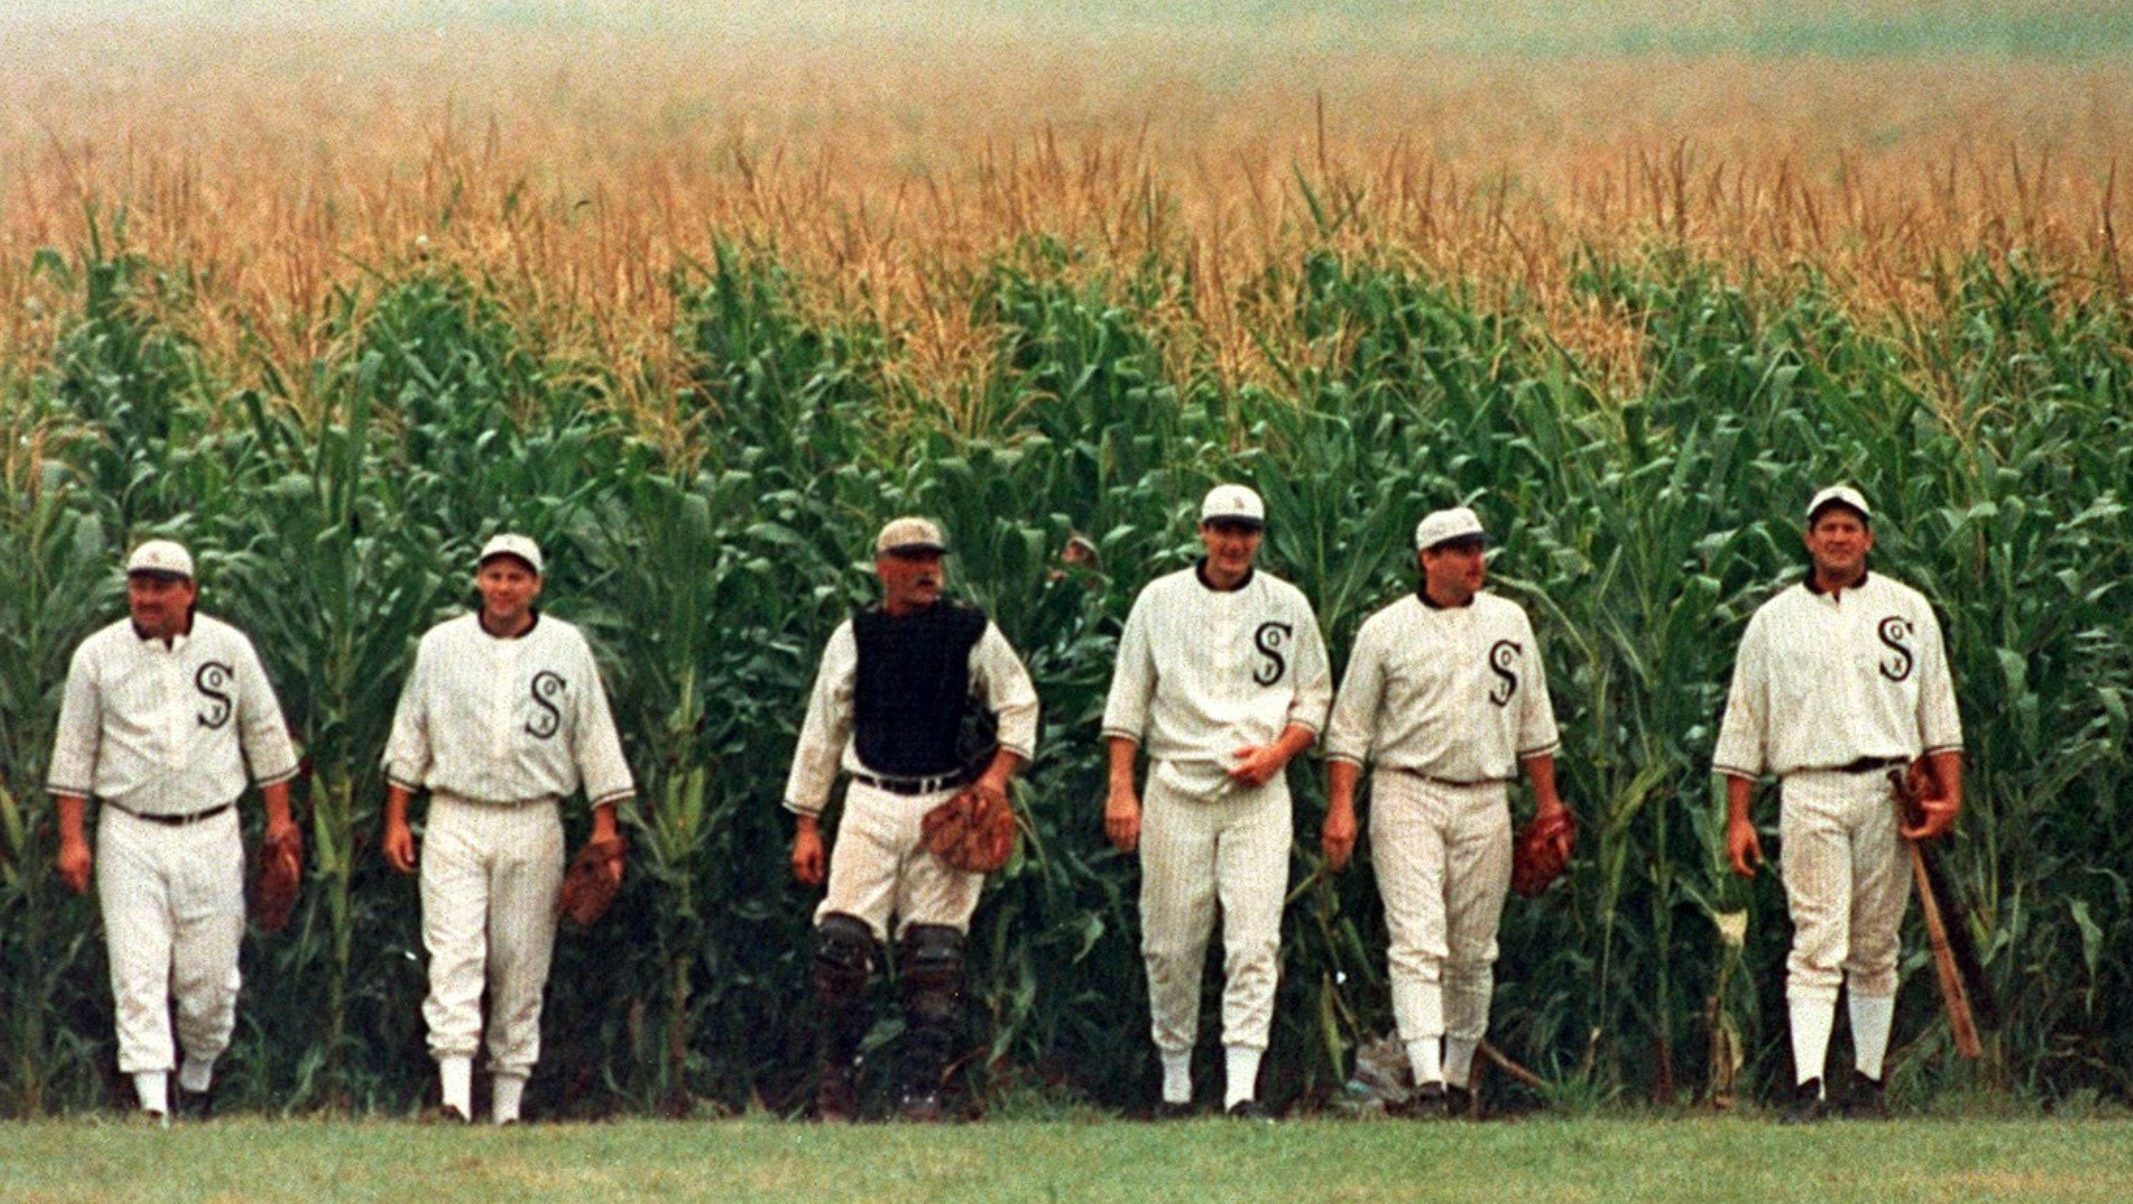 33: The “Field Of Dreams” is fiction